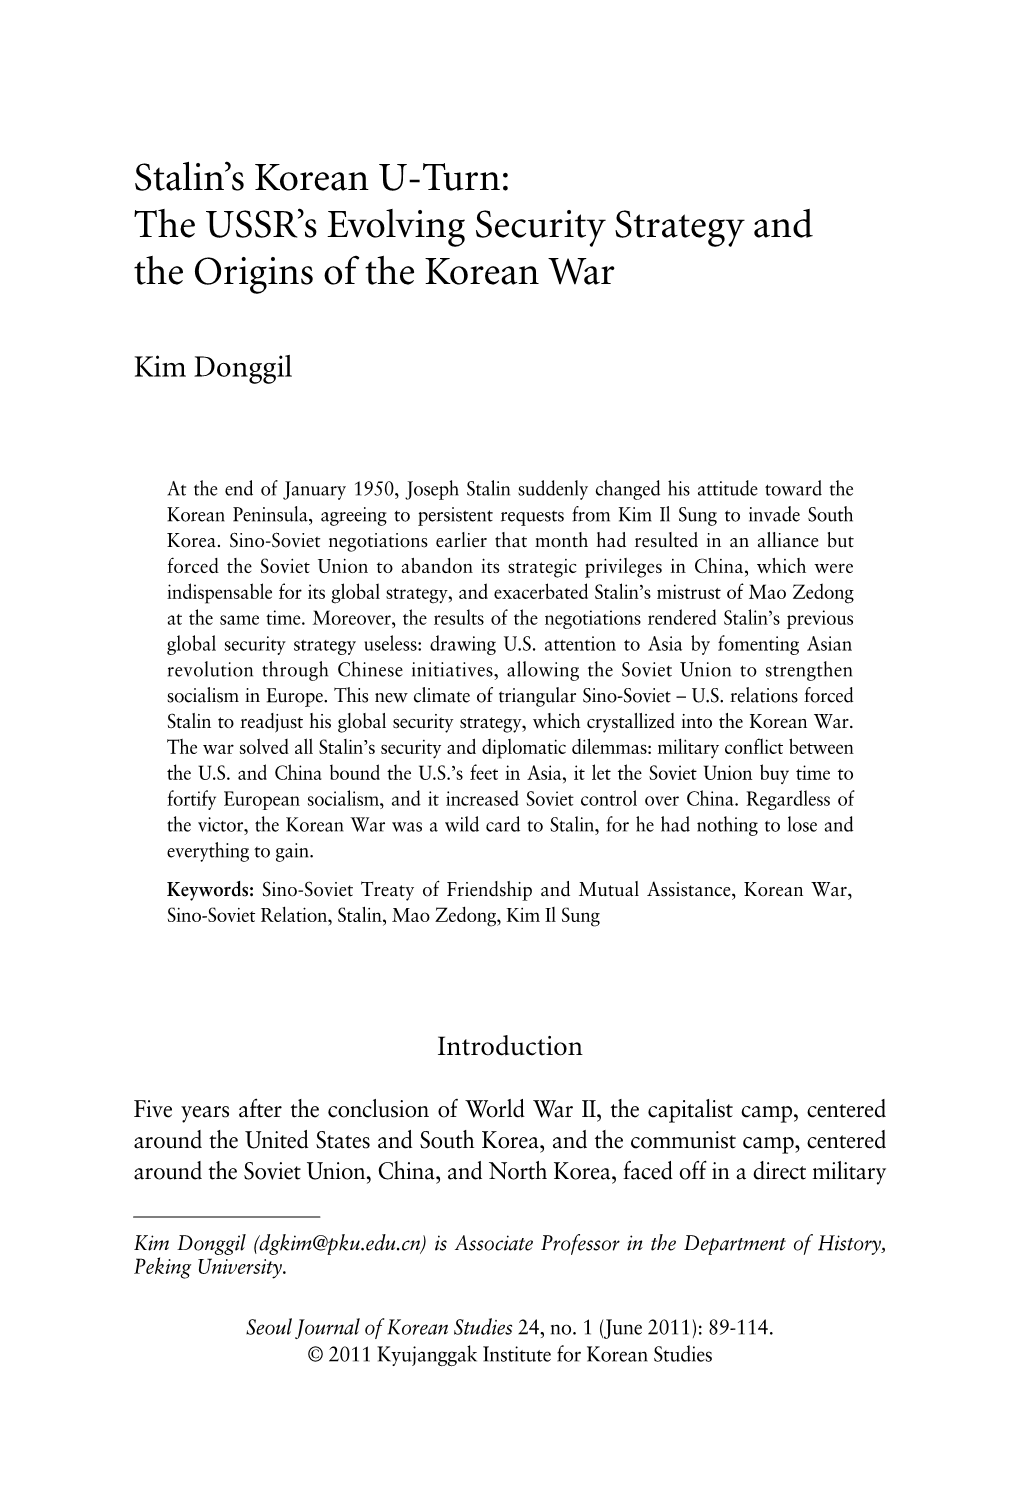 Stalin's Korean U-Turn: the USSR's Evolving Security Strategy and The